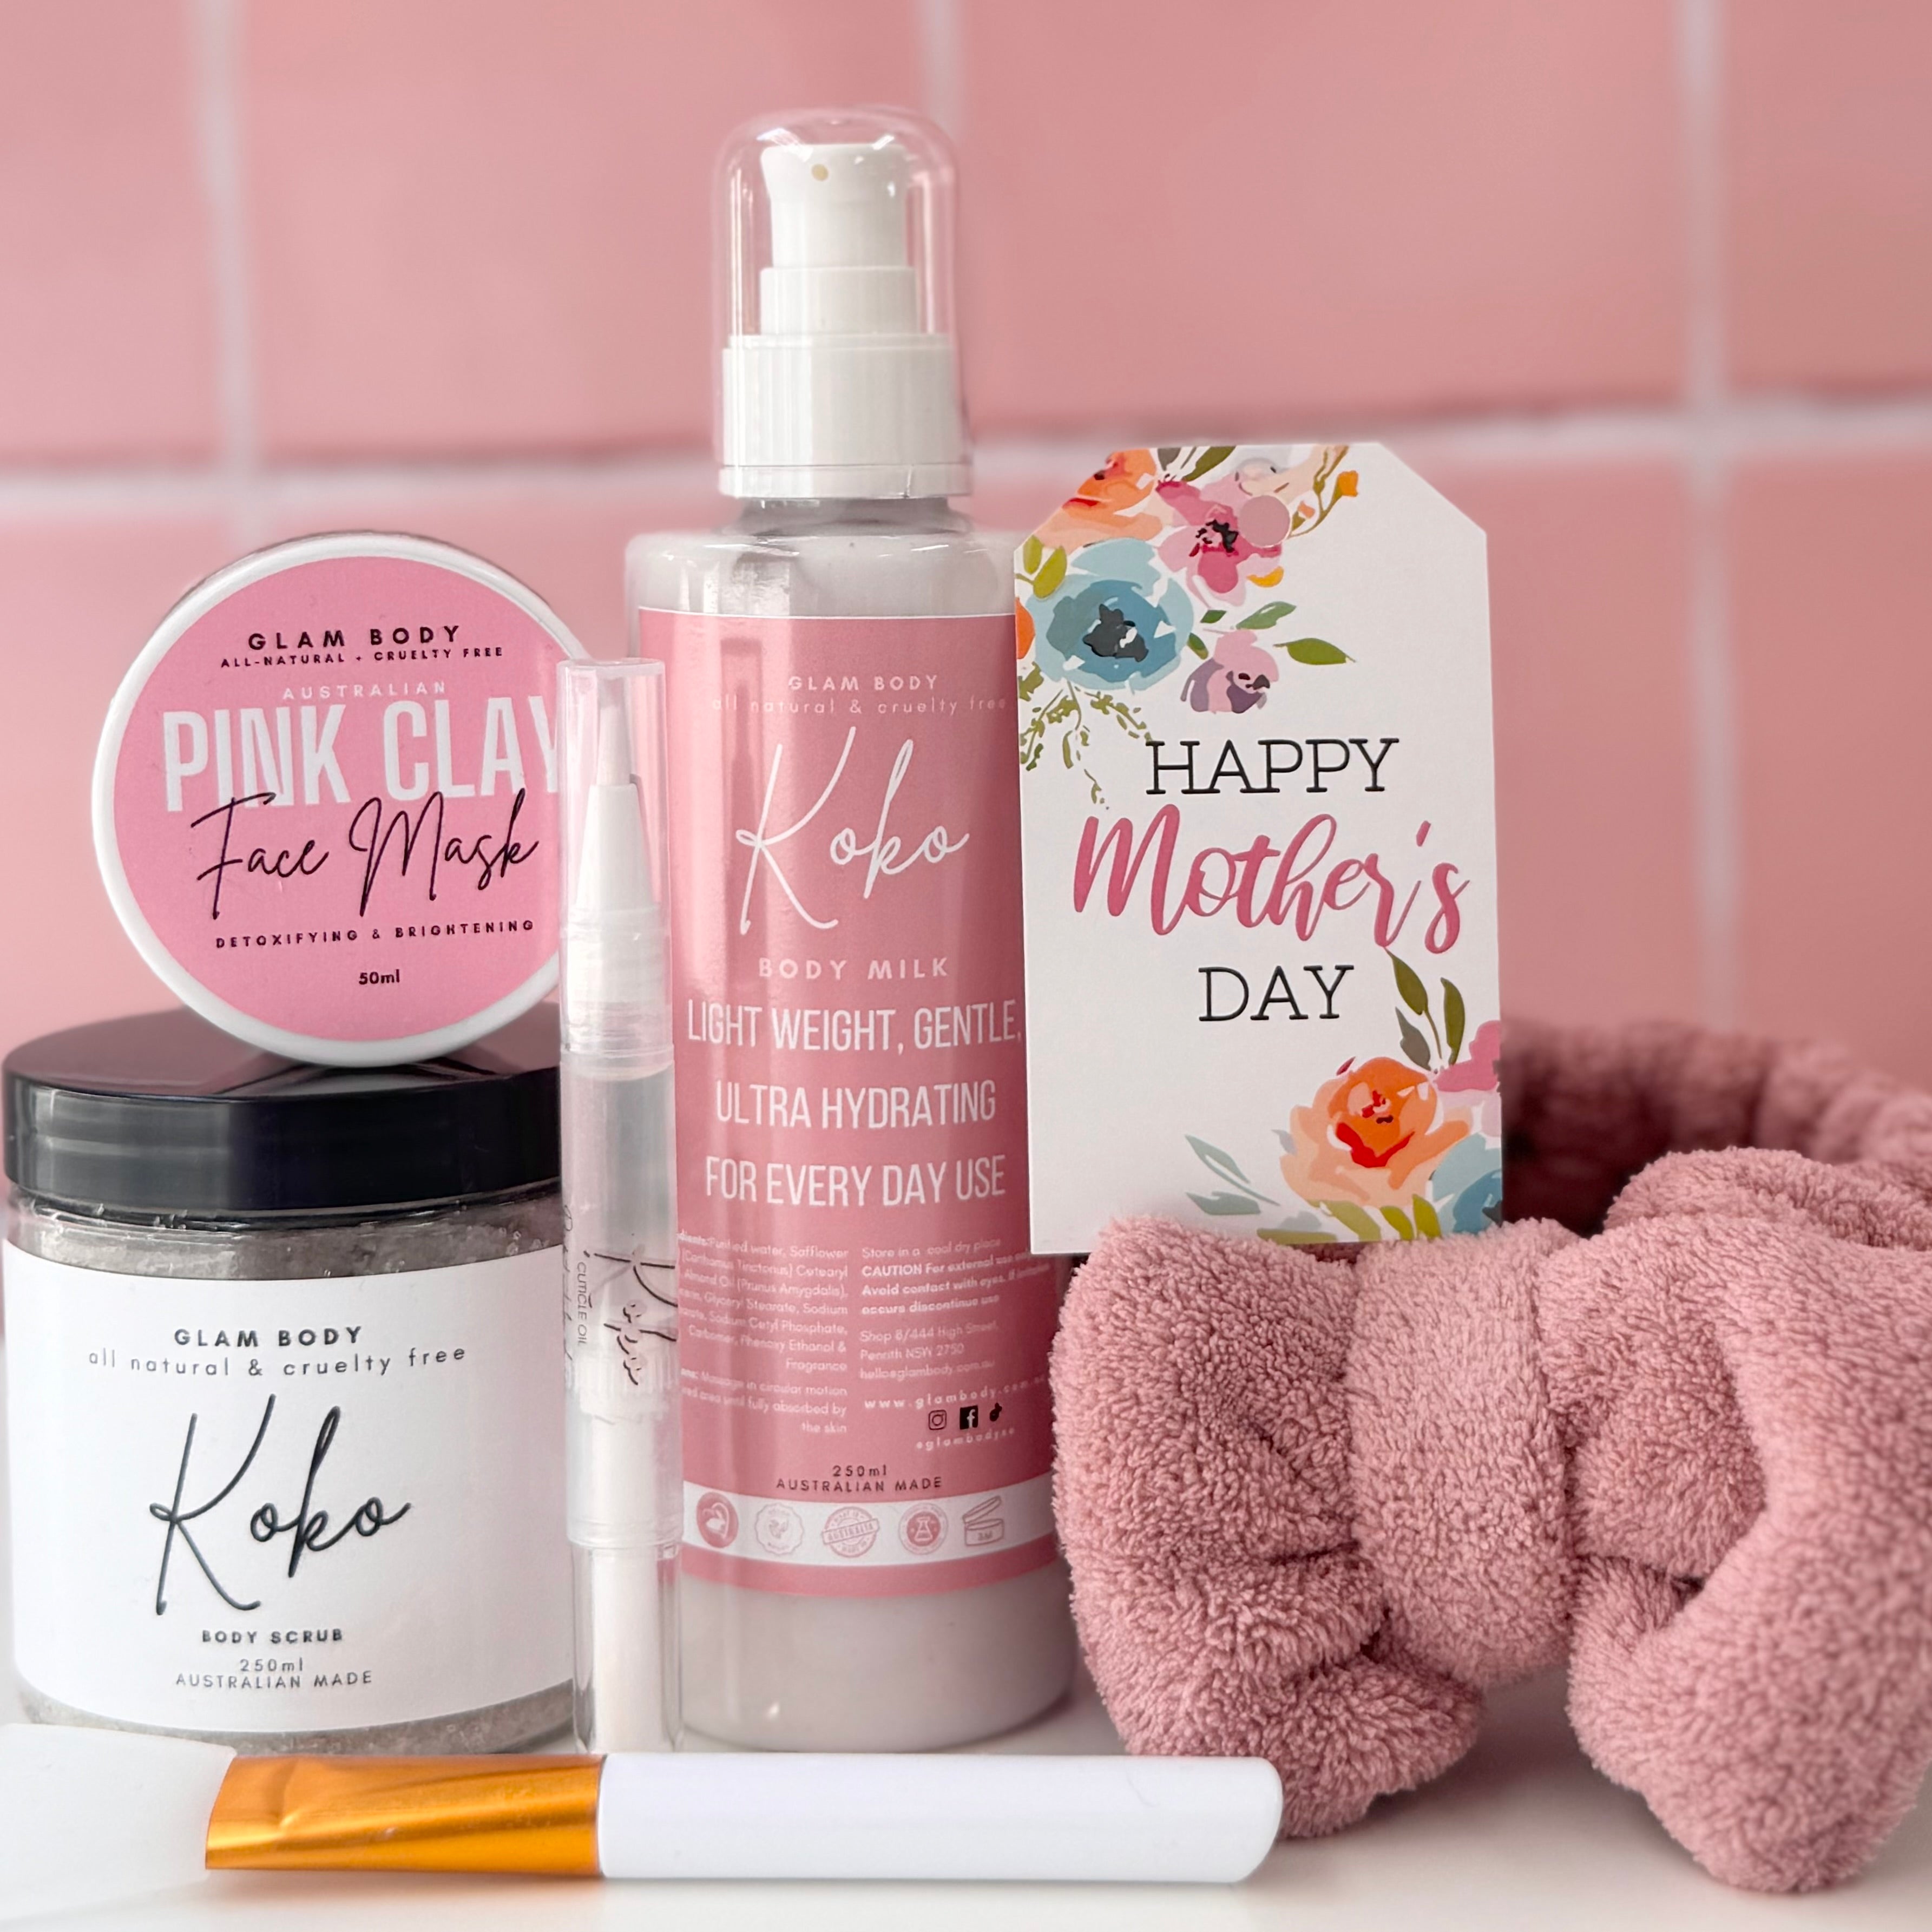 MUMS PAMPER PACK - Glam Body